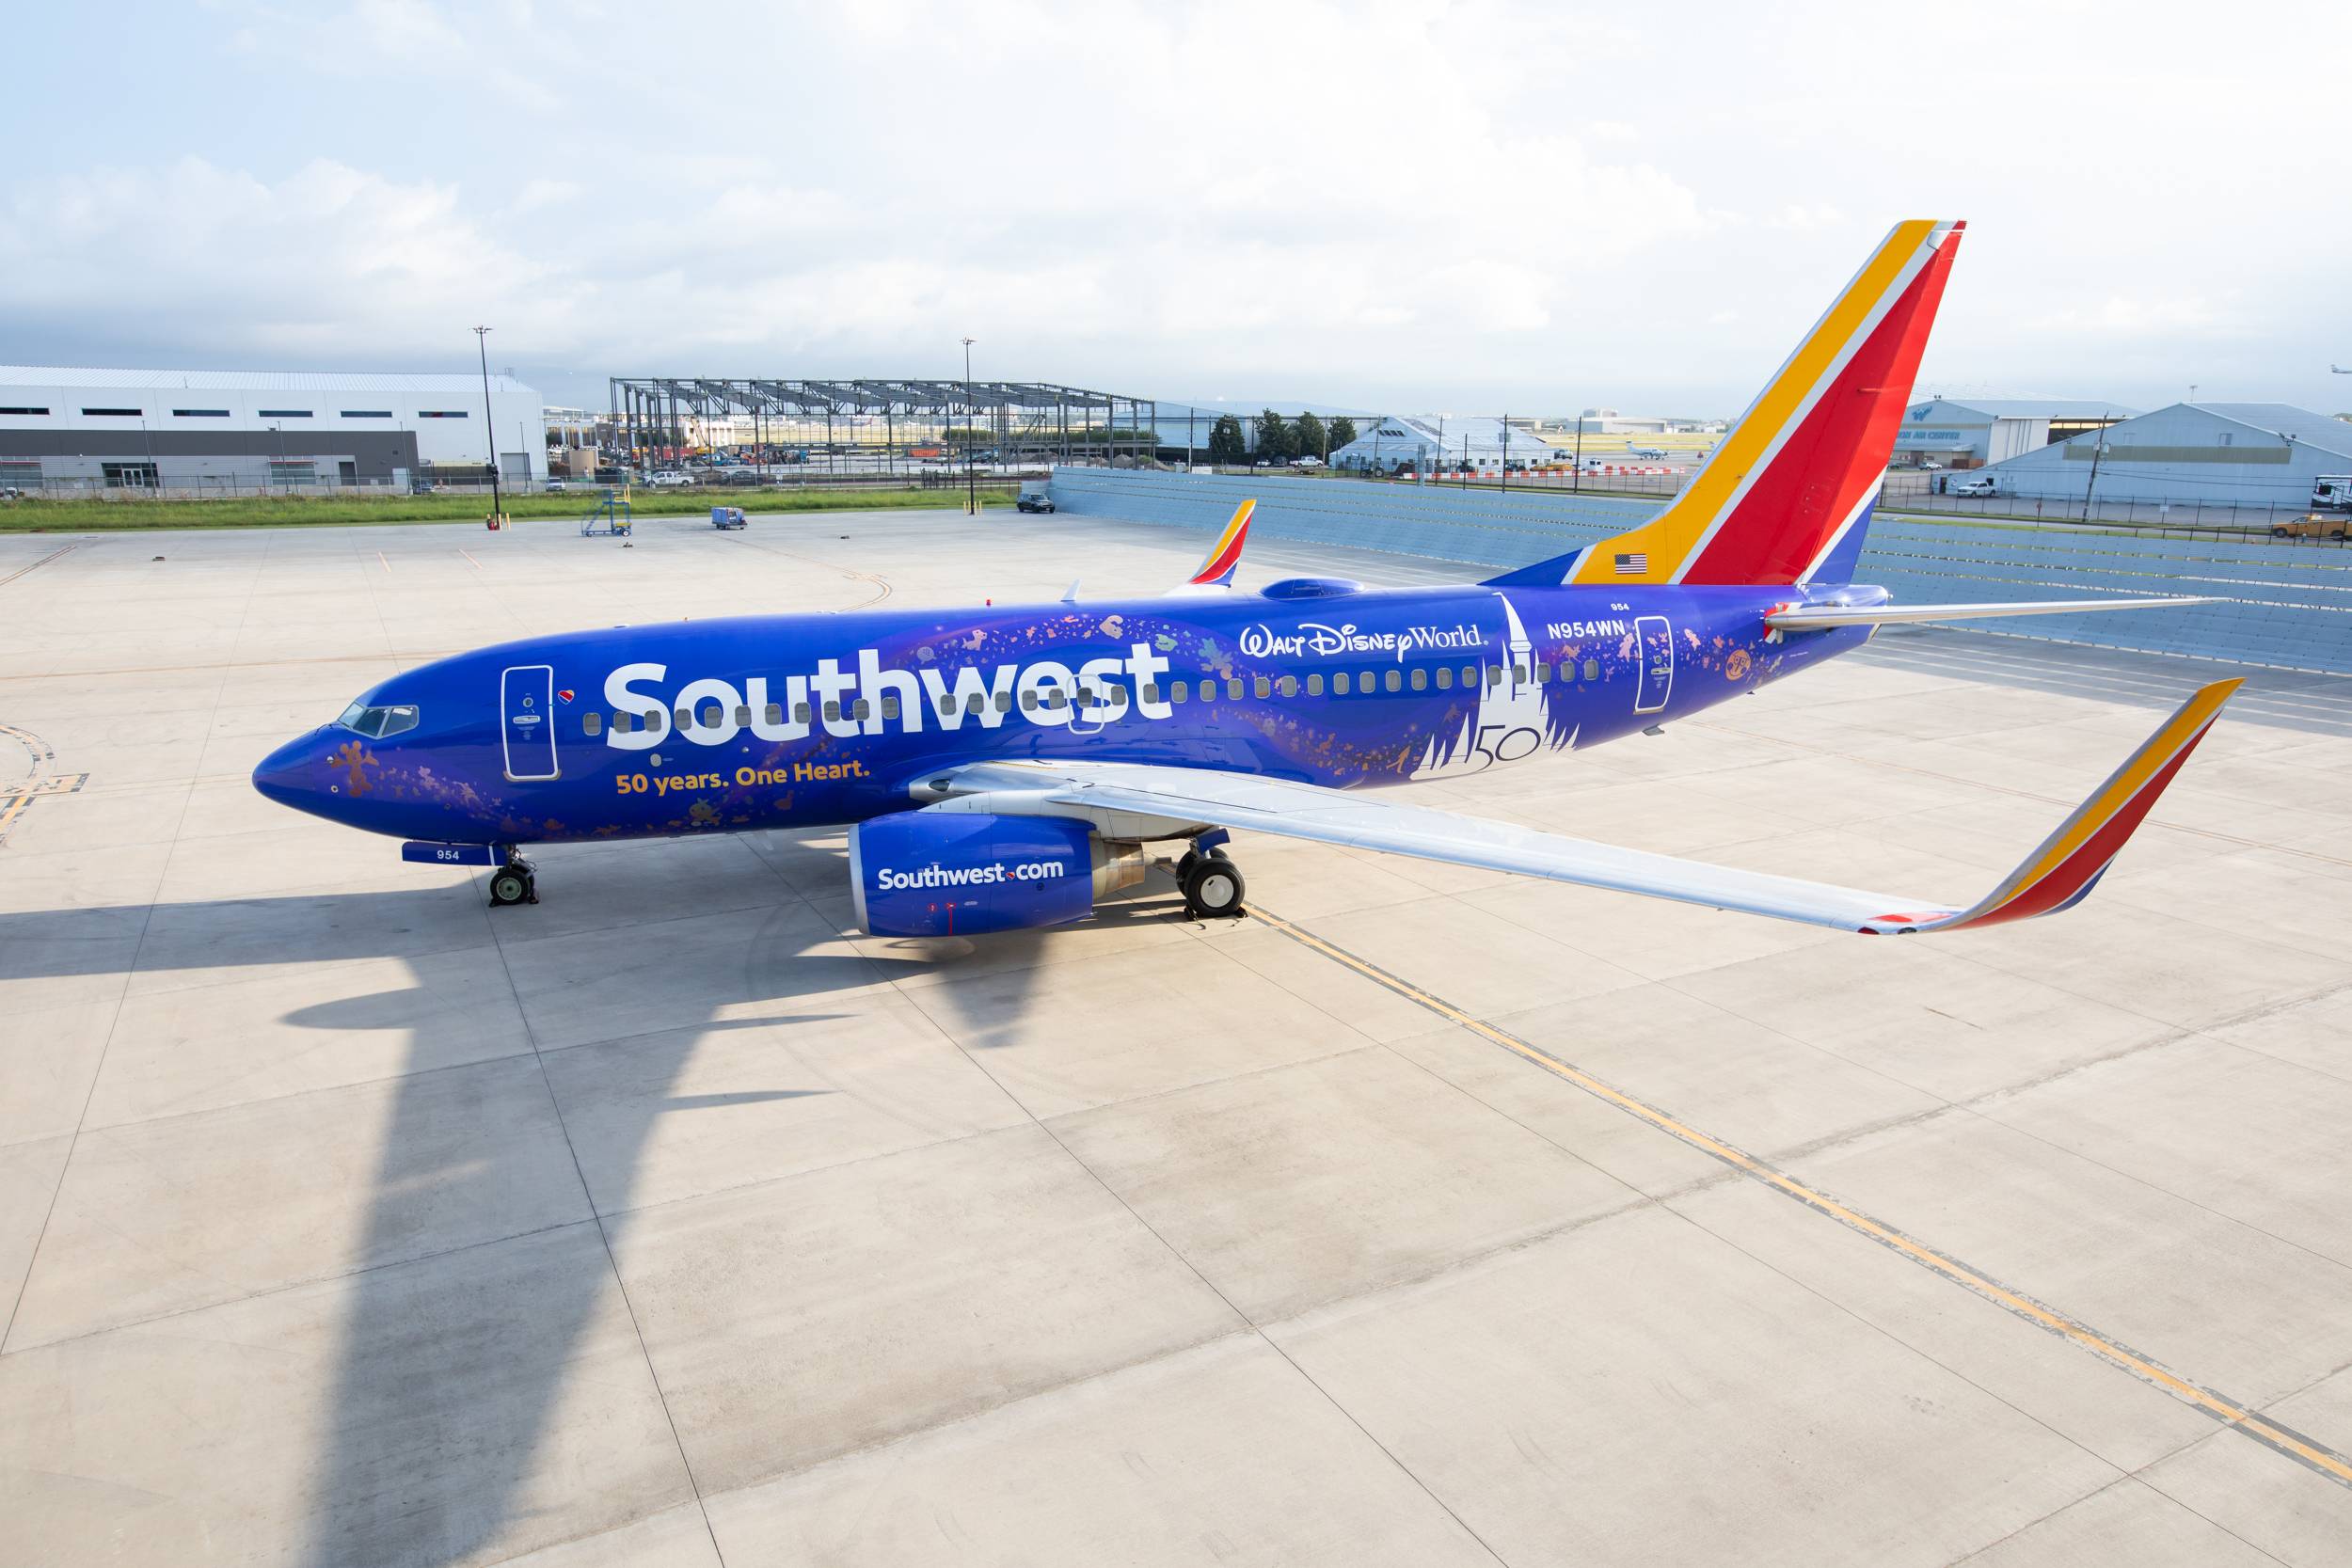 Southwest Airlines and Walt Disney World Resort celebrate 50th Anniversary of both companies with commemorative 737 aircraft